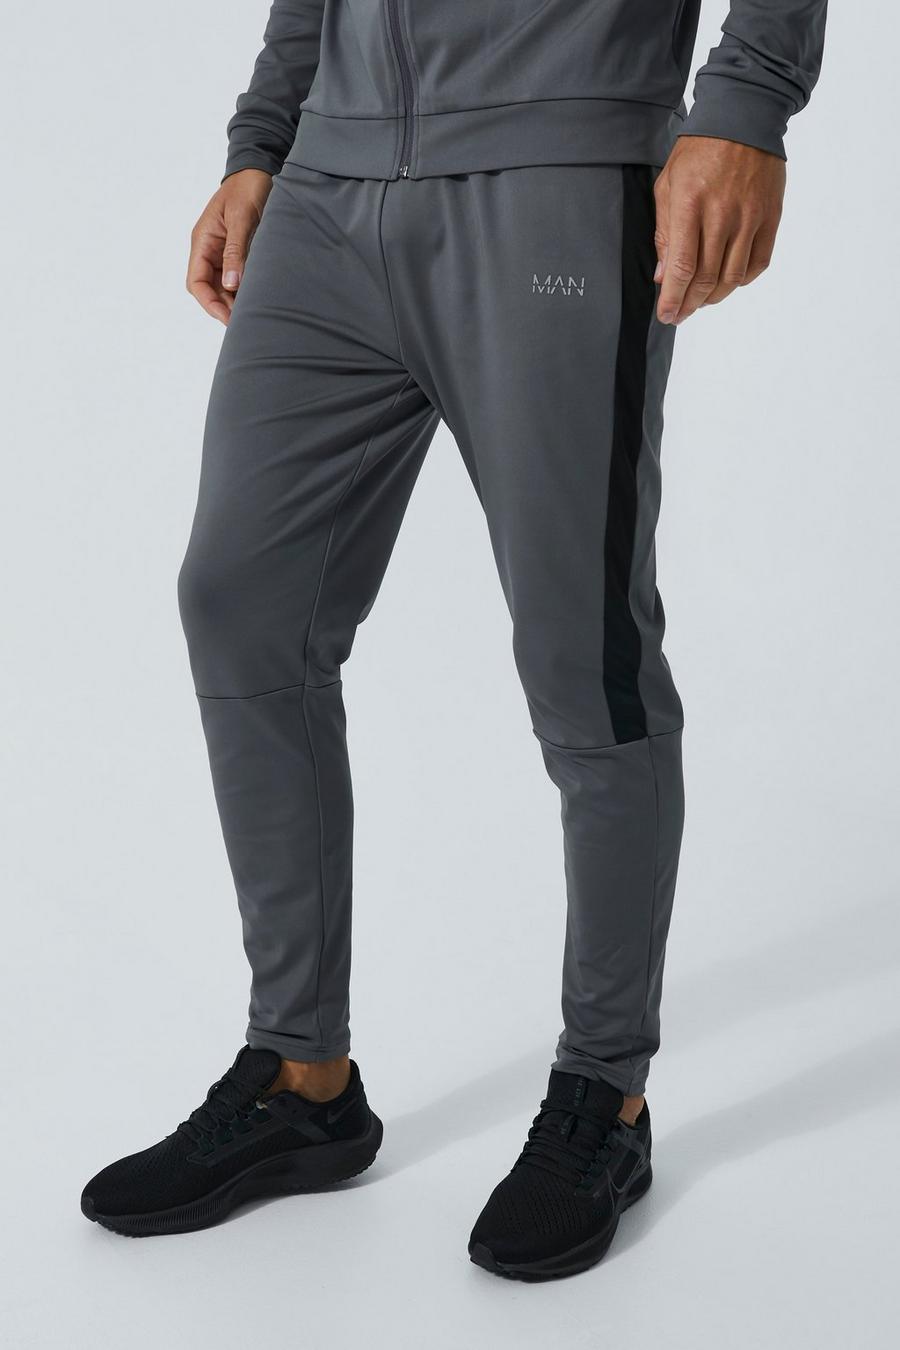 Charcoal grey Tall Man Active Performance Training Joggers